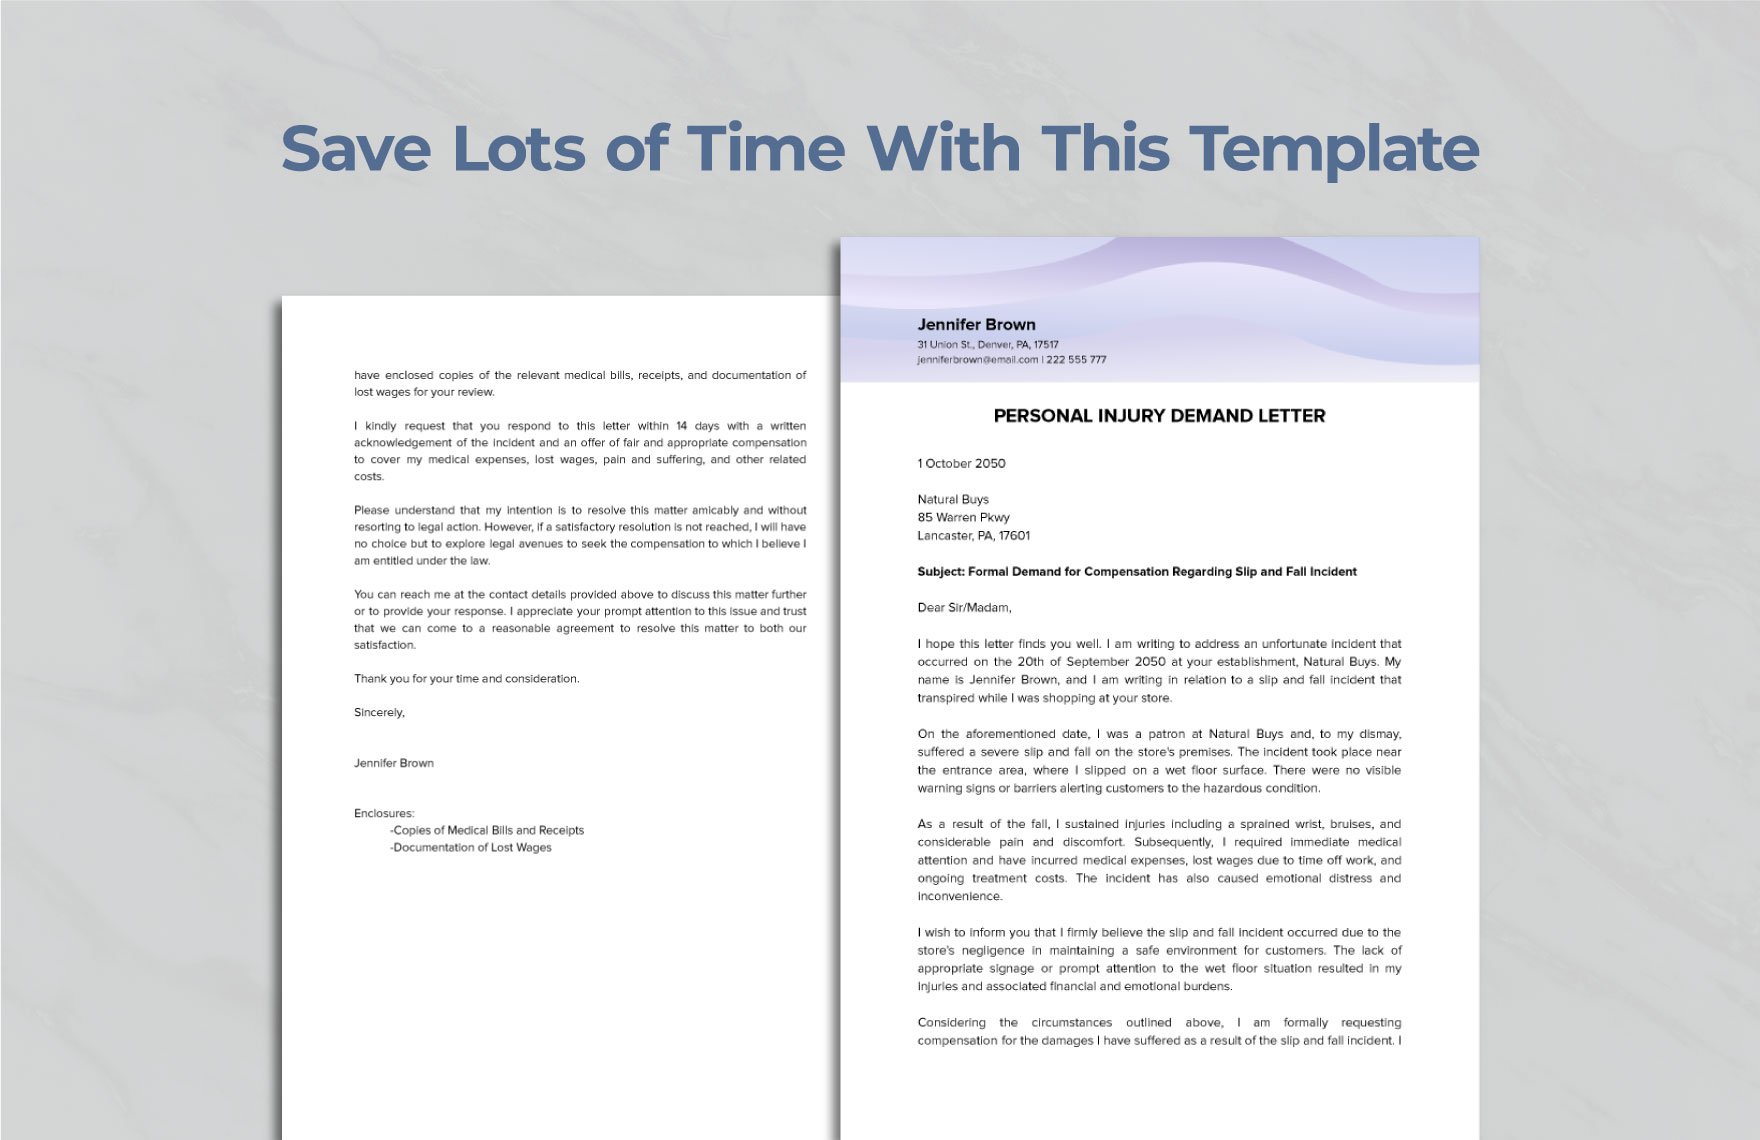 Sample Personal Injury Demand Letter Template